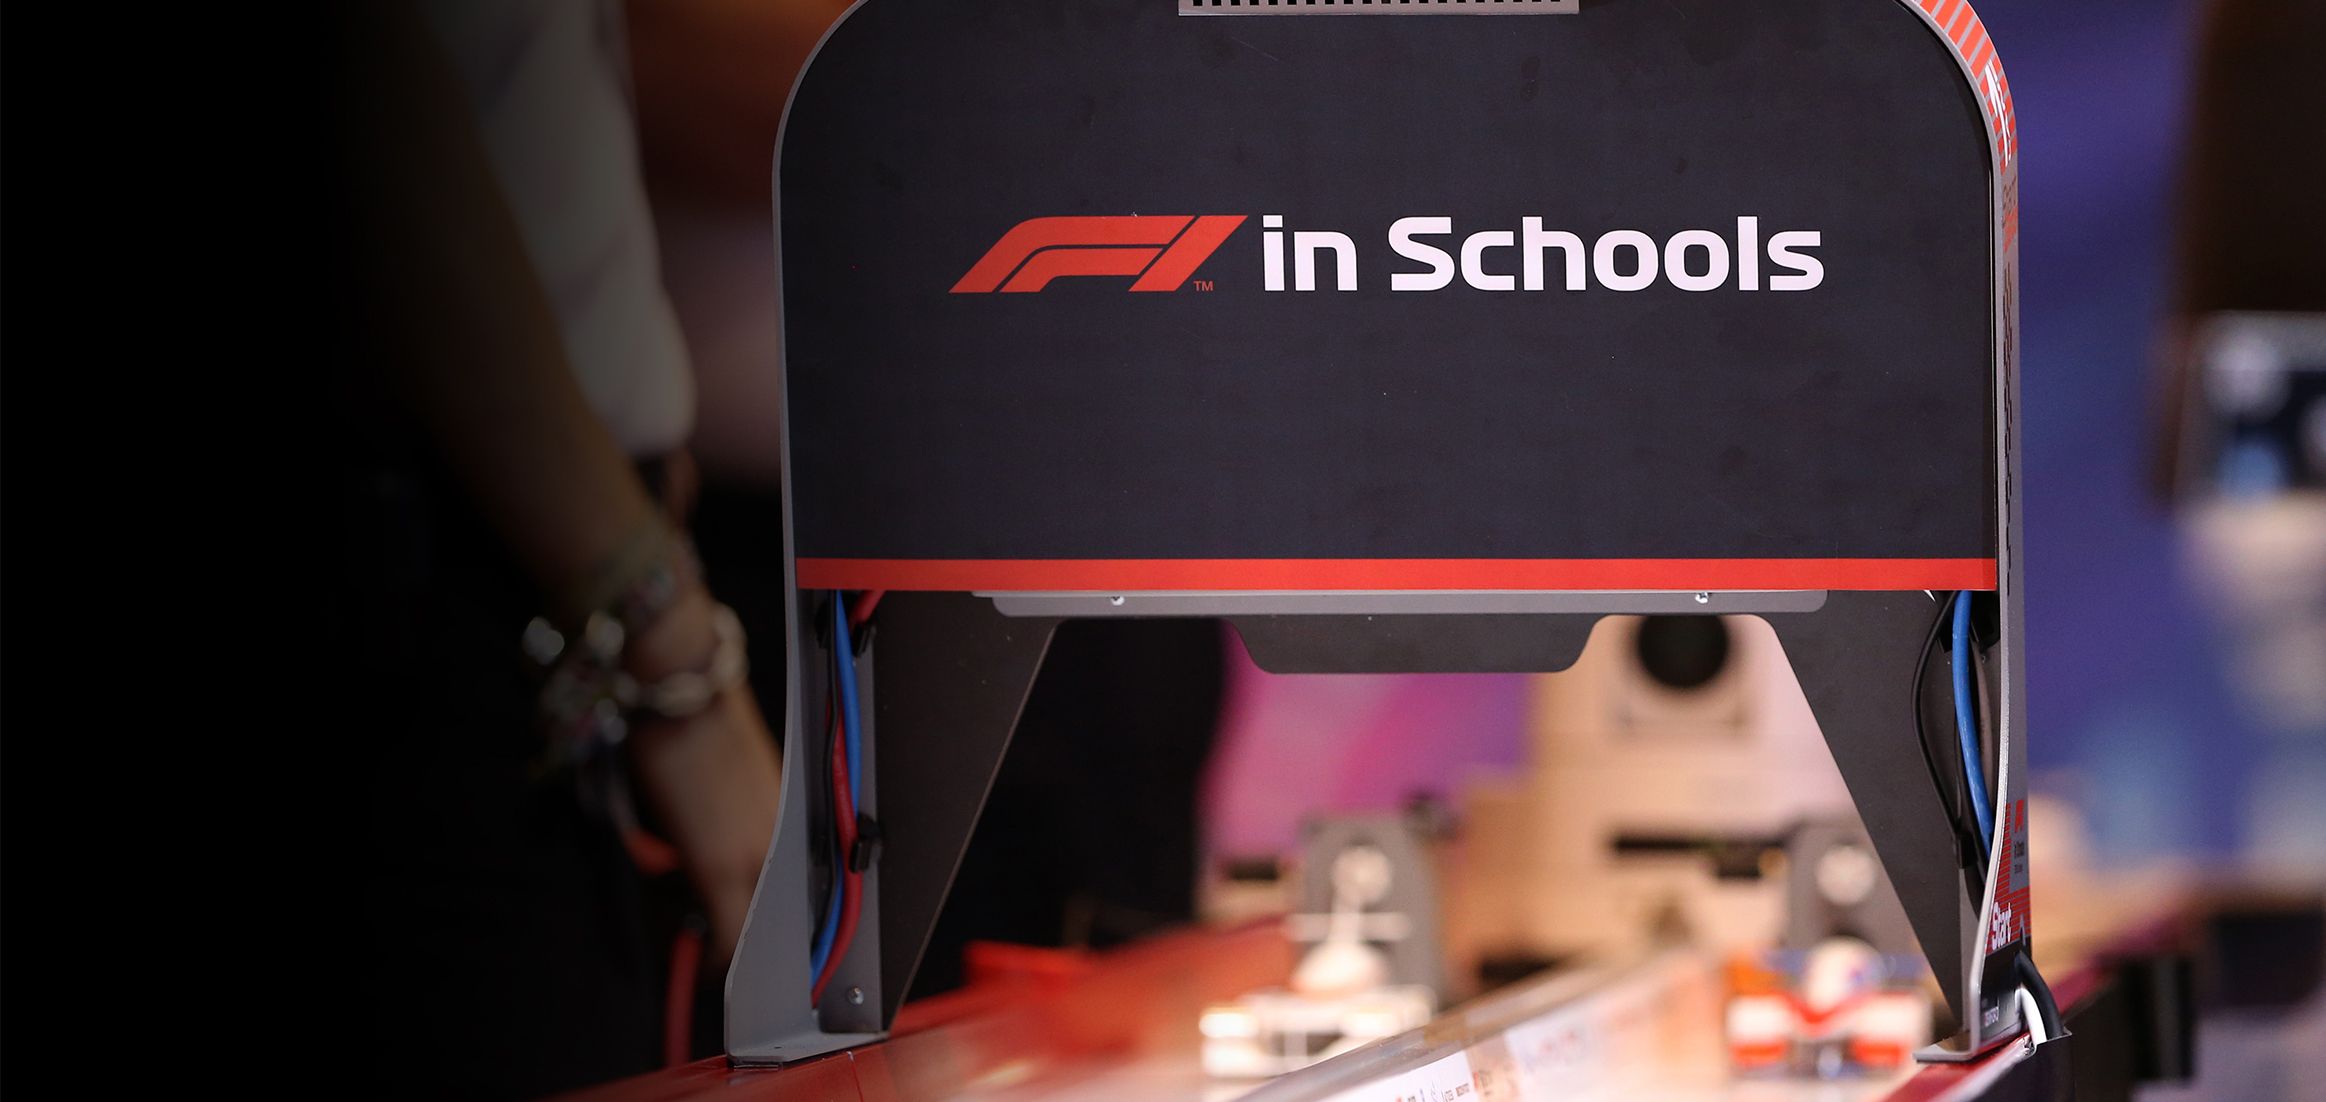 Meet all the teams competing at the 2022 F1 in Schools World Finals